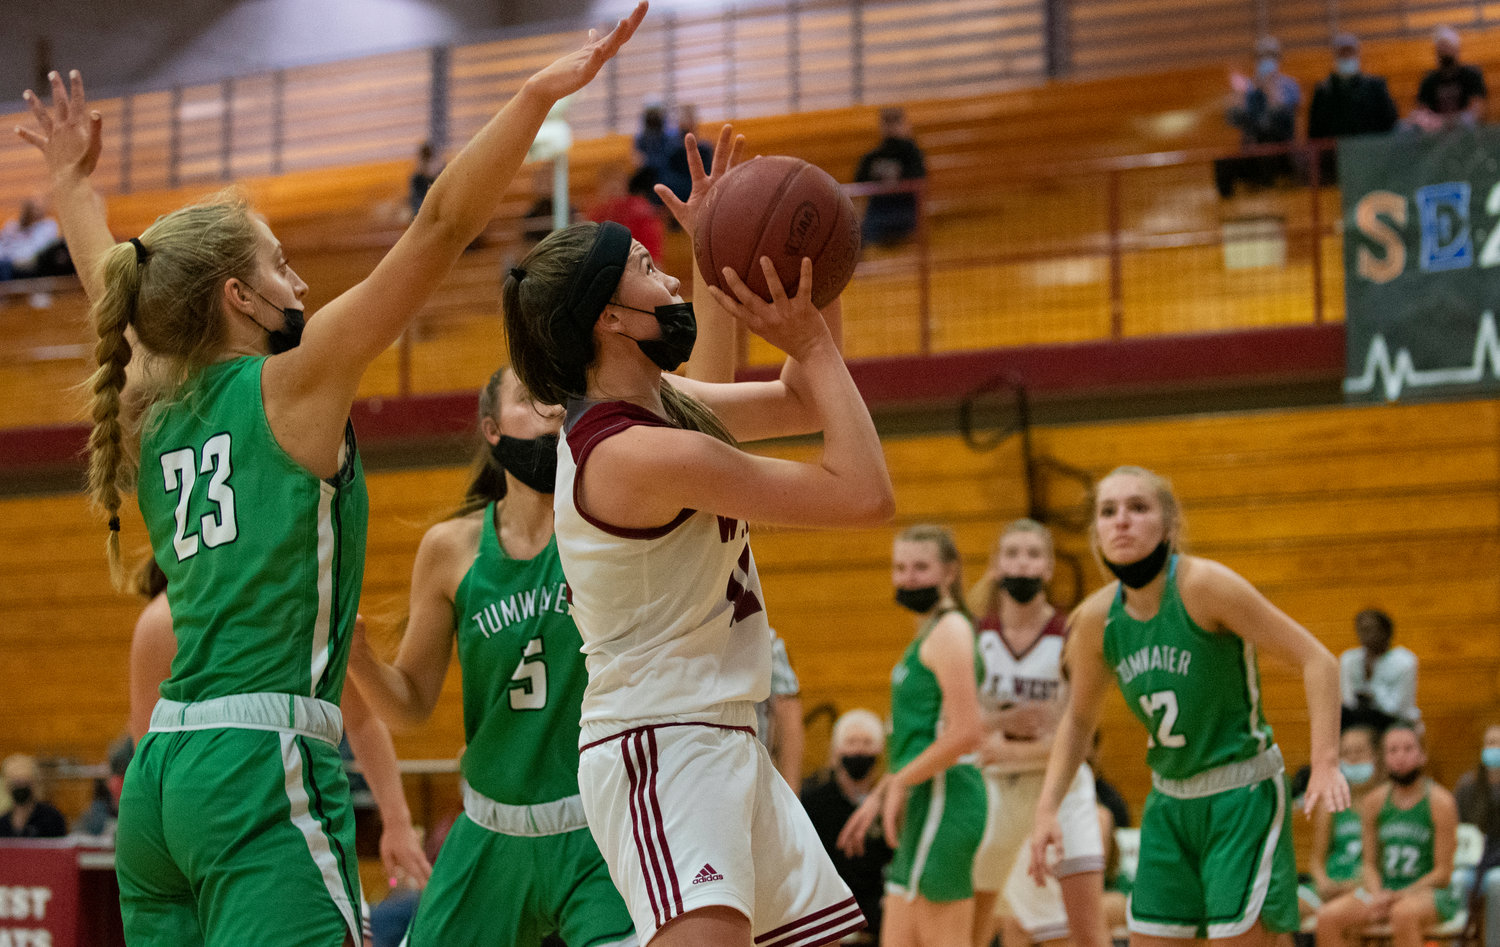 W.F. West's Olivia Remund puts a shot up in the paint against Tumwater on Monday.